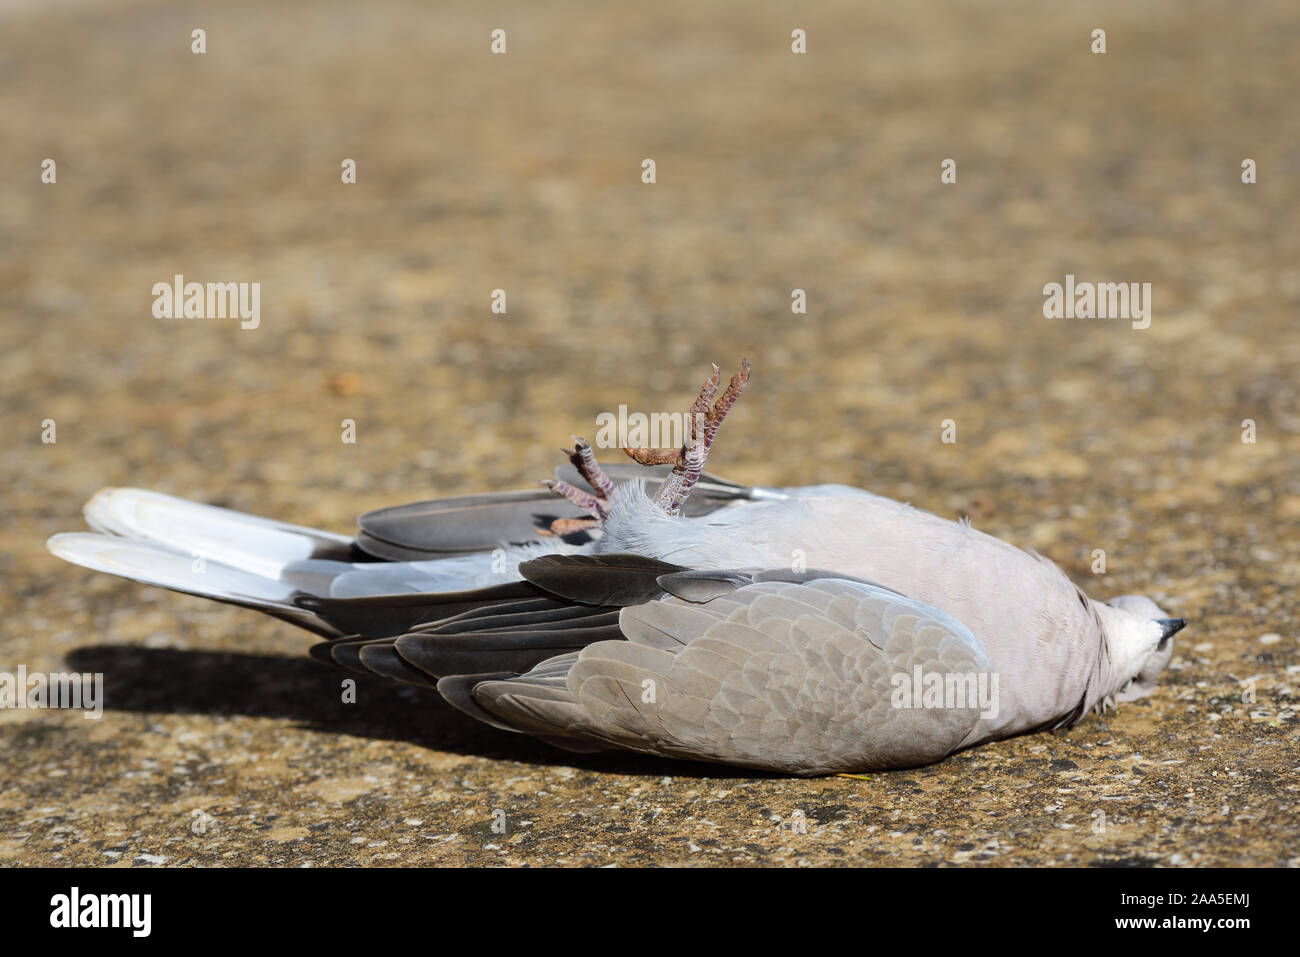 A dead pigeon lies in the sun on the ground on the back and stretches its feet upwards Stock Photo